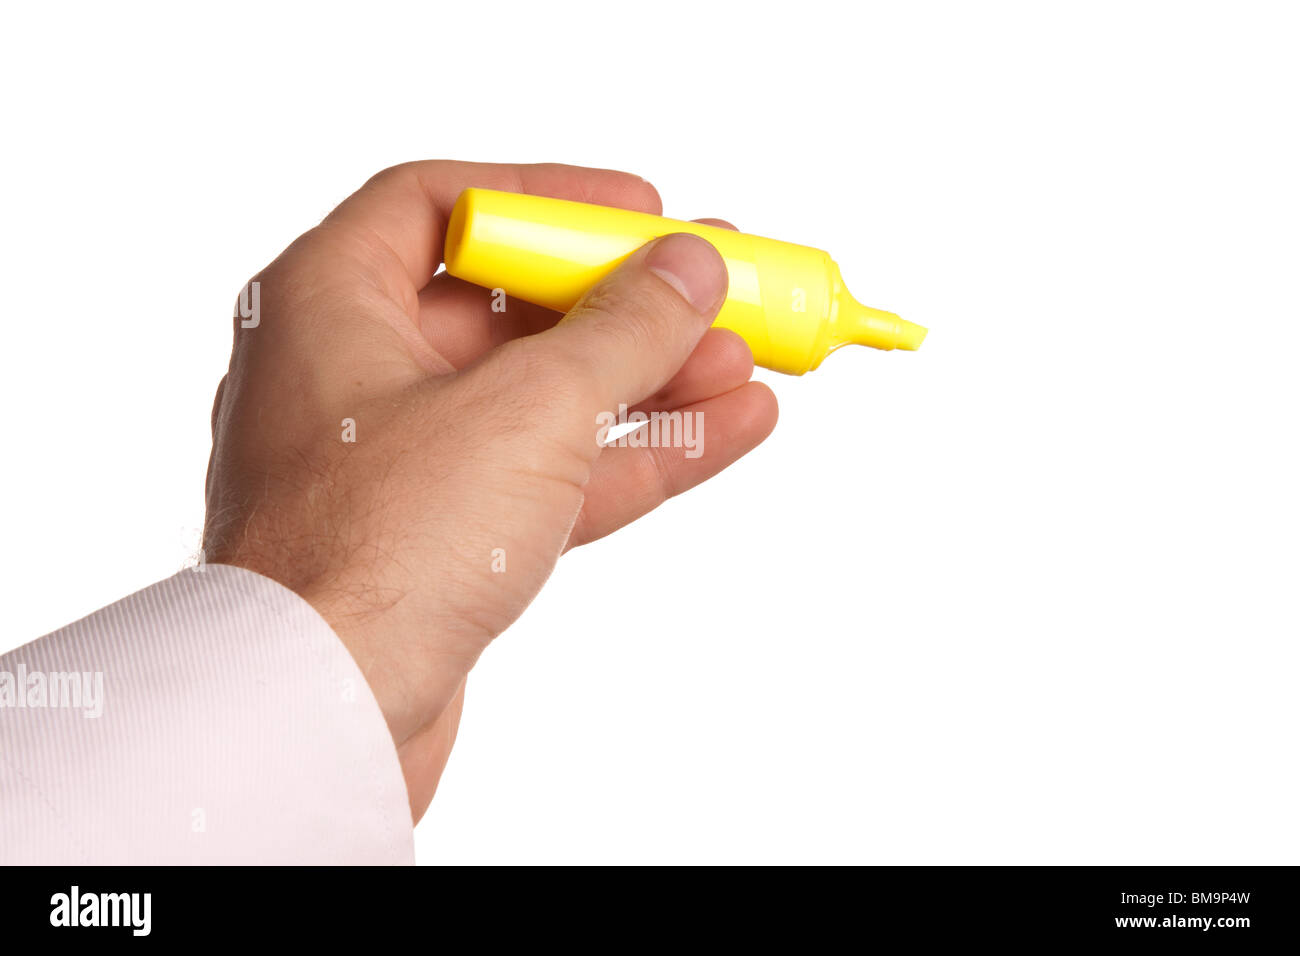 man holding a yellow marker pen in his hand Stock Photo